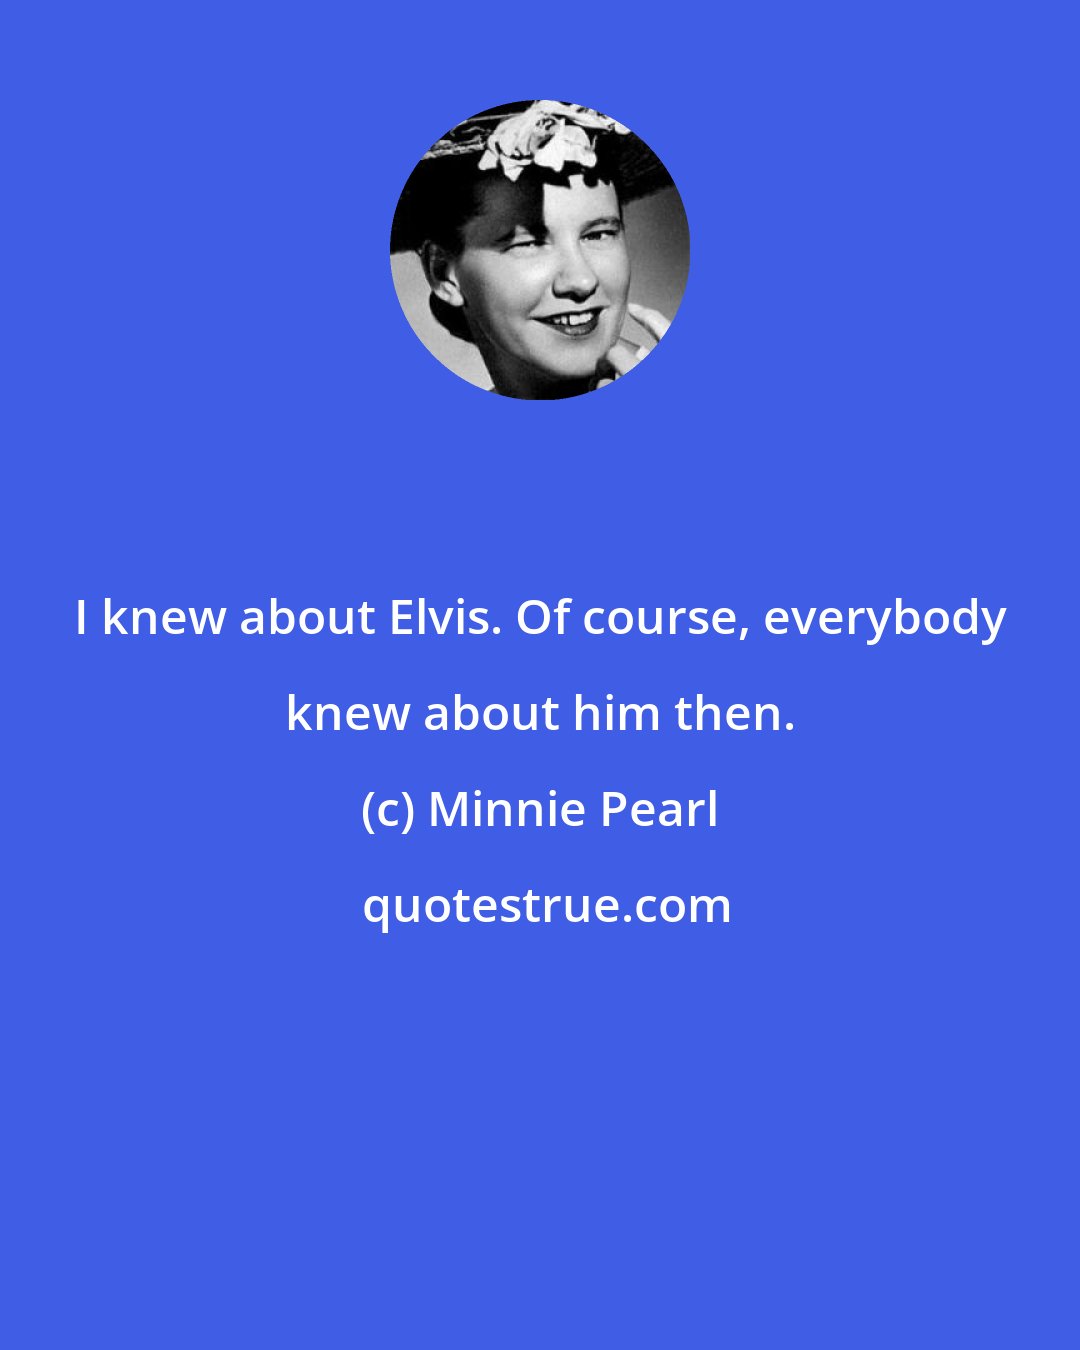 Minnie Pearl: I knew about Elvis. Of course, everybody knew about him then.